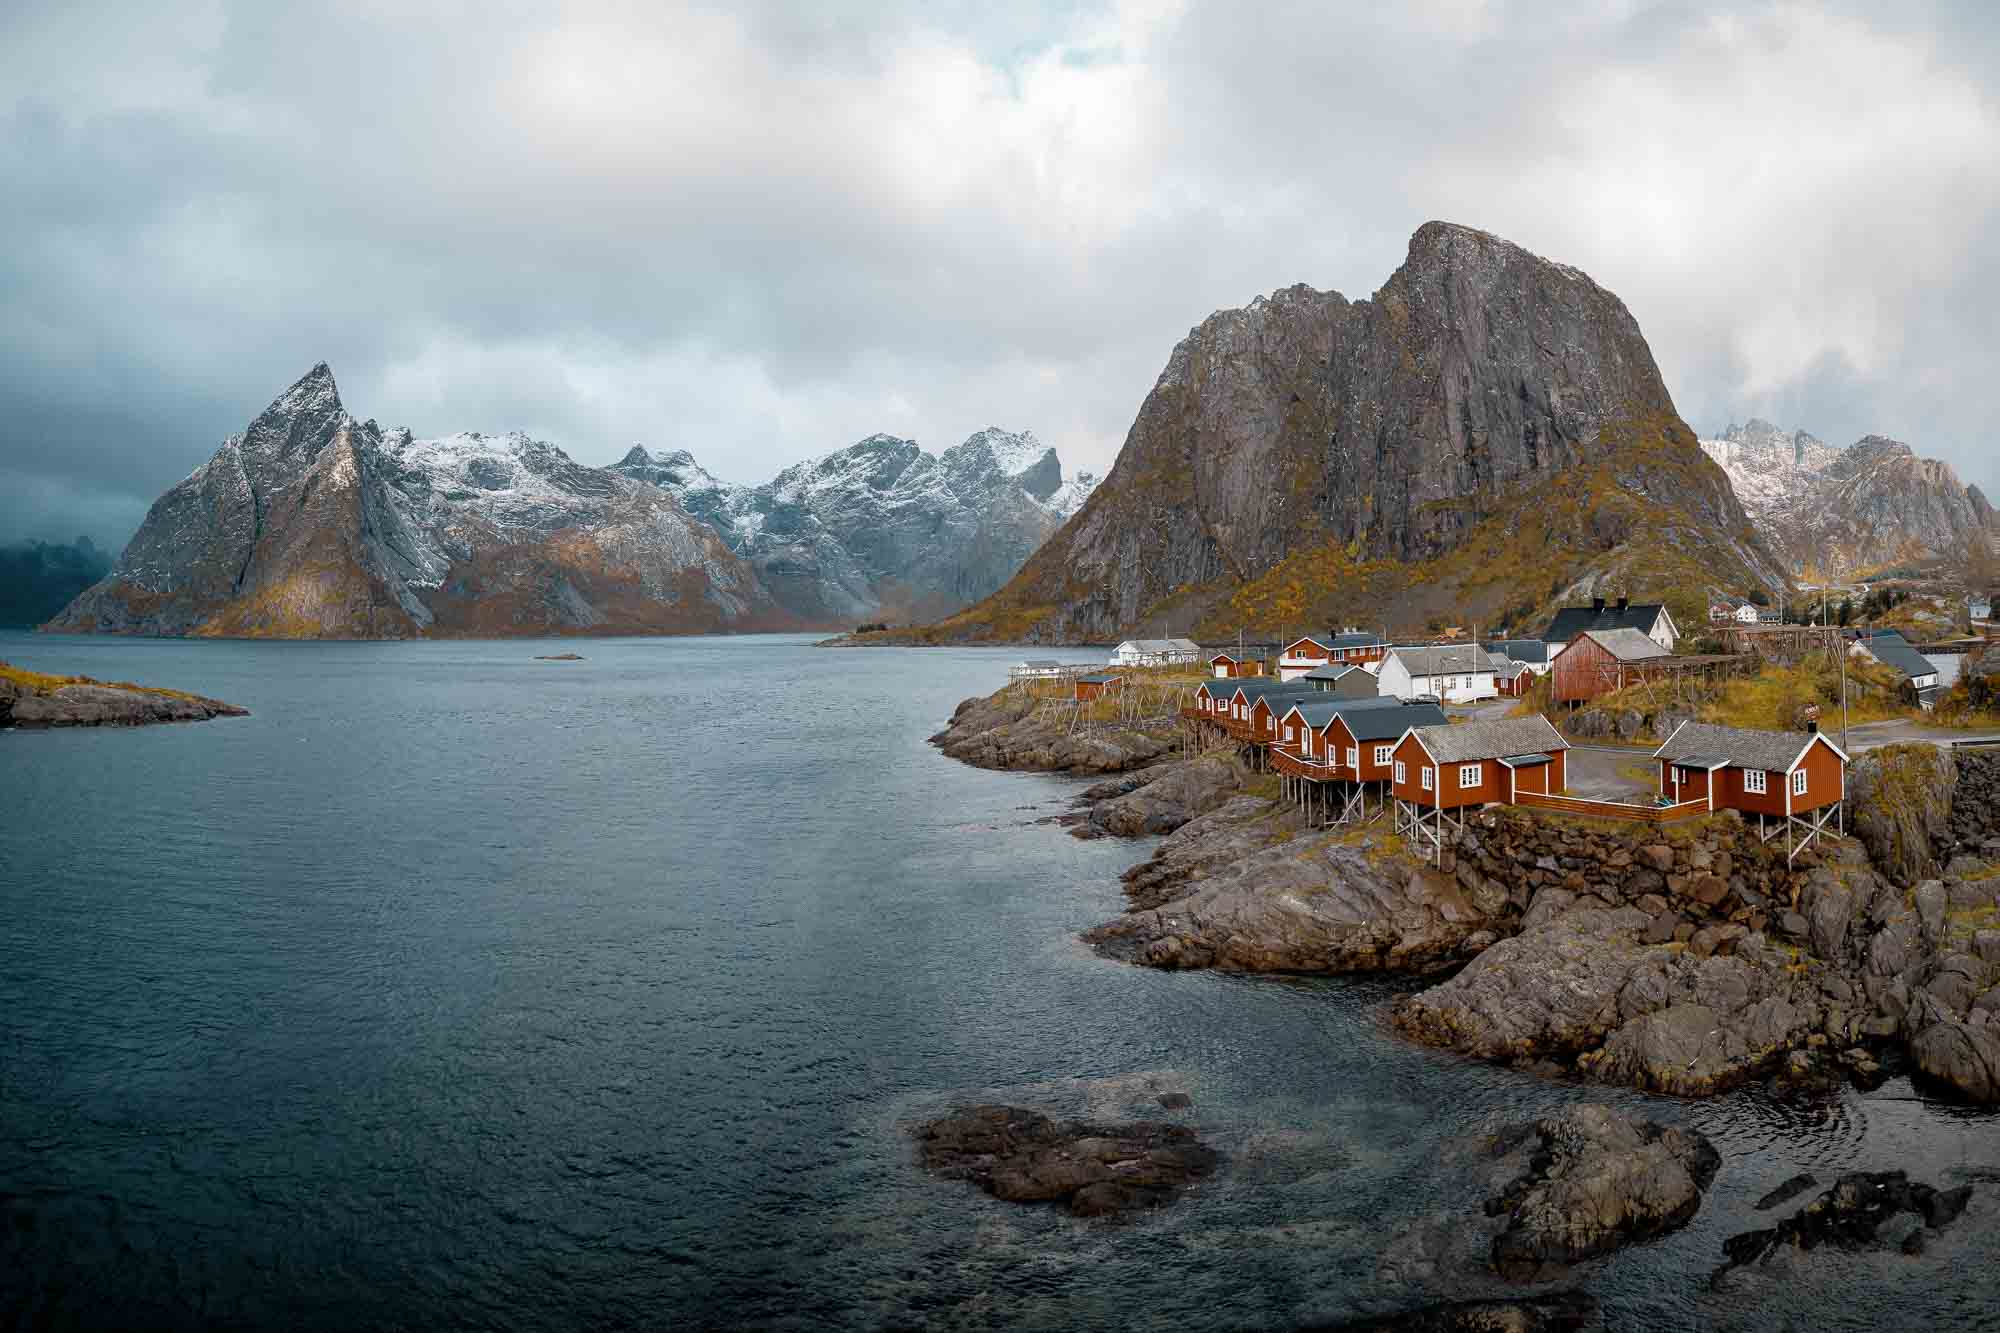 Red rorbuer cabins in Hamnøy, Lofoten Islands, Norway, with calm waters and snow-dusted mountains under an overcast sky.